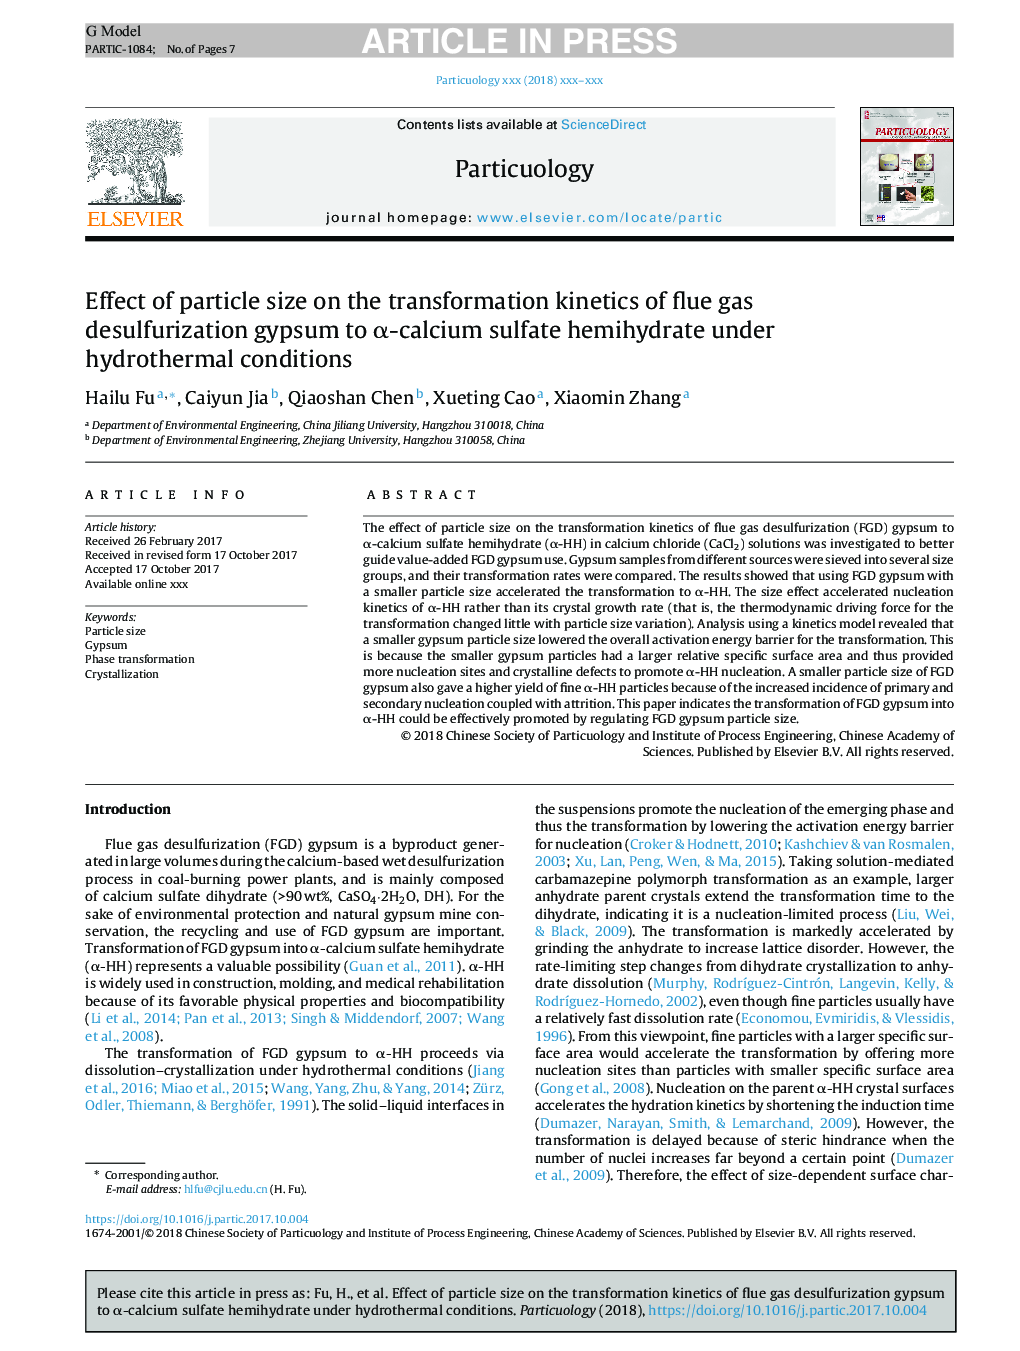 Effect of particle size on the transformation kinetics of flue gas desulfurization gypsum to Î±-calcium sulfate hemihydrate under hydrothermal conditions